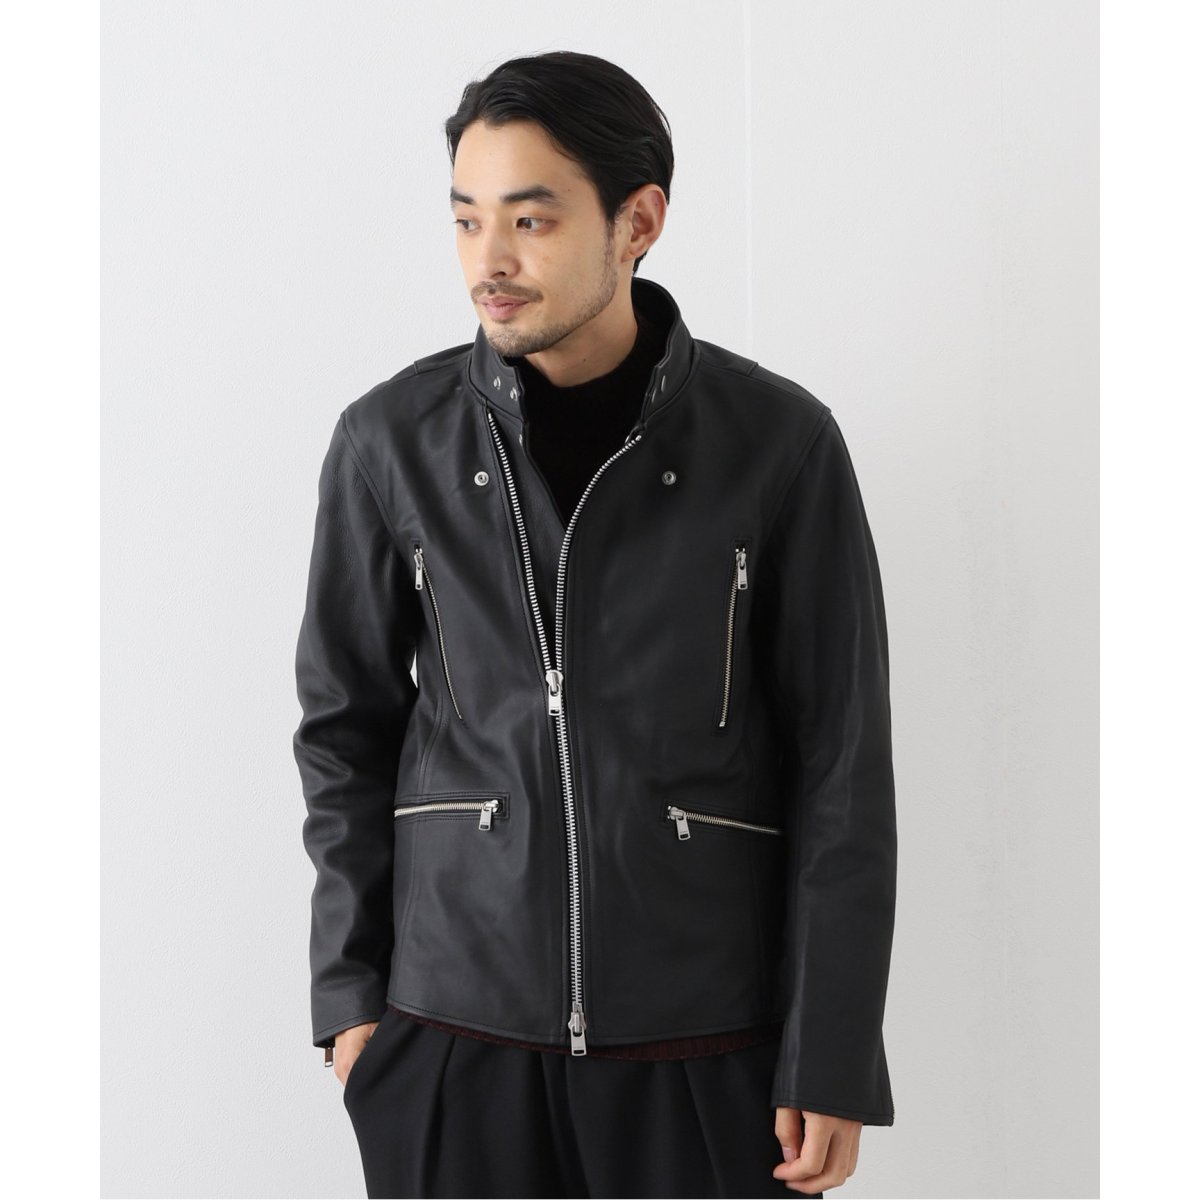 nonnative / ノンネイティブ】RIDER BLOUSON COW LEATHER by 